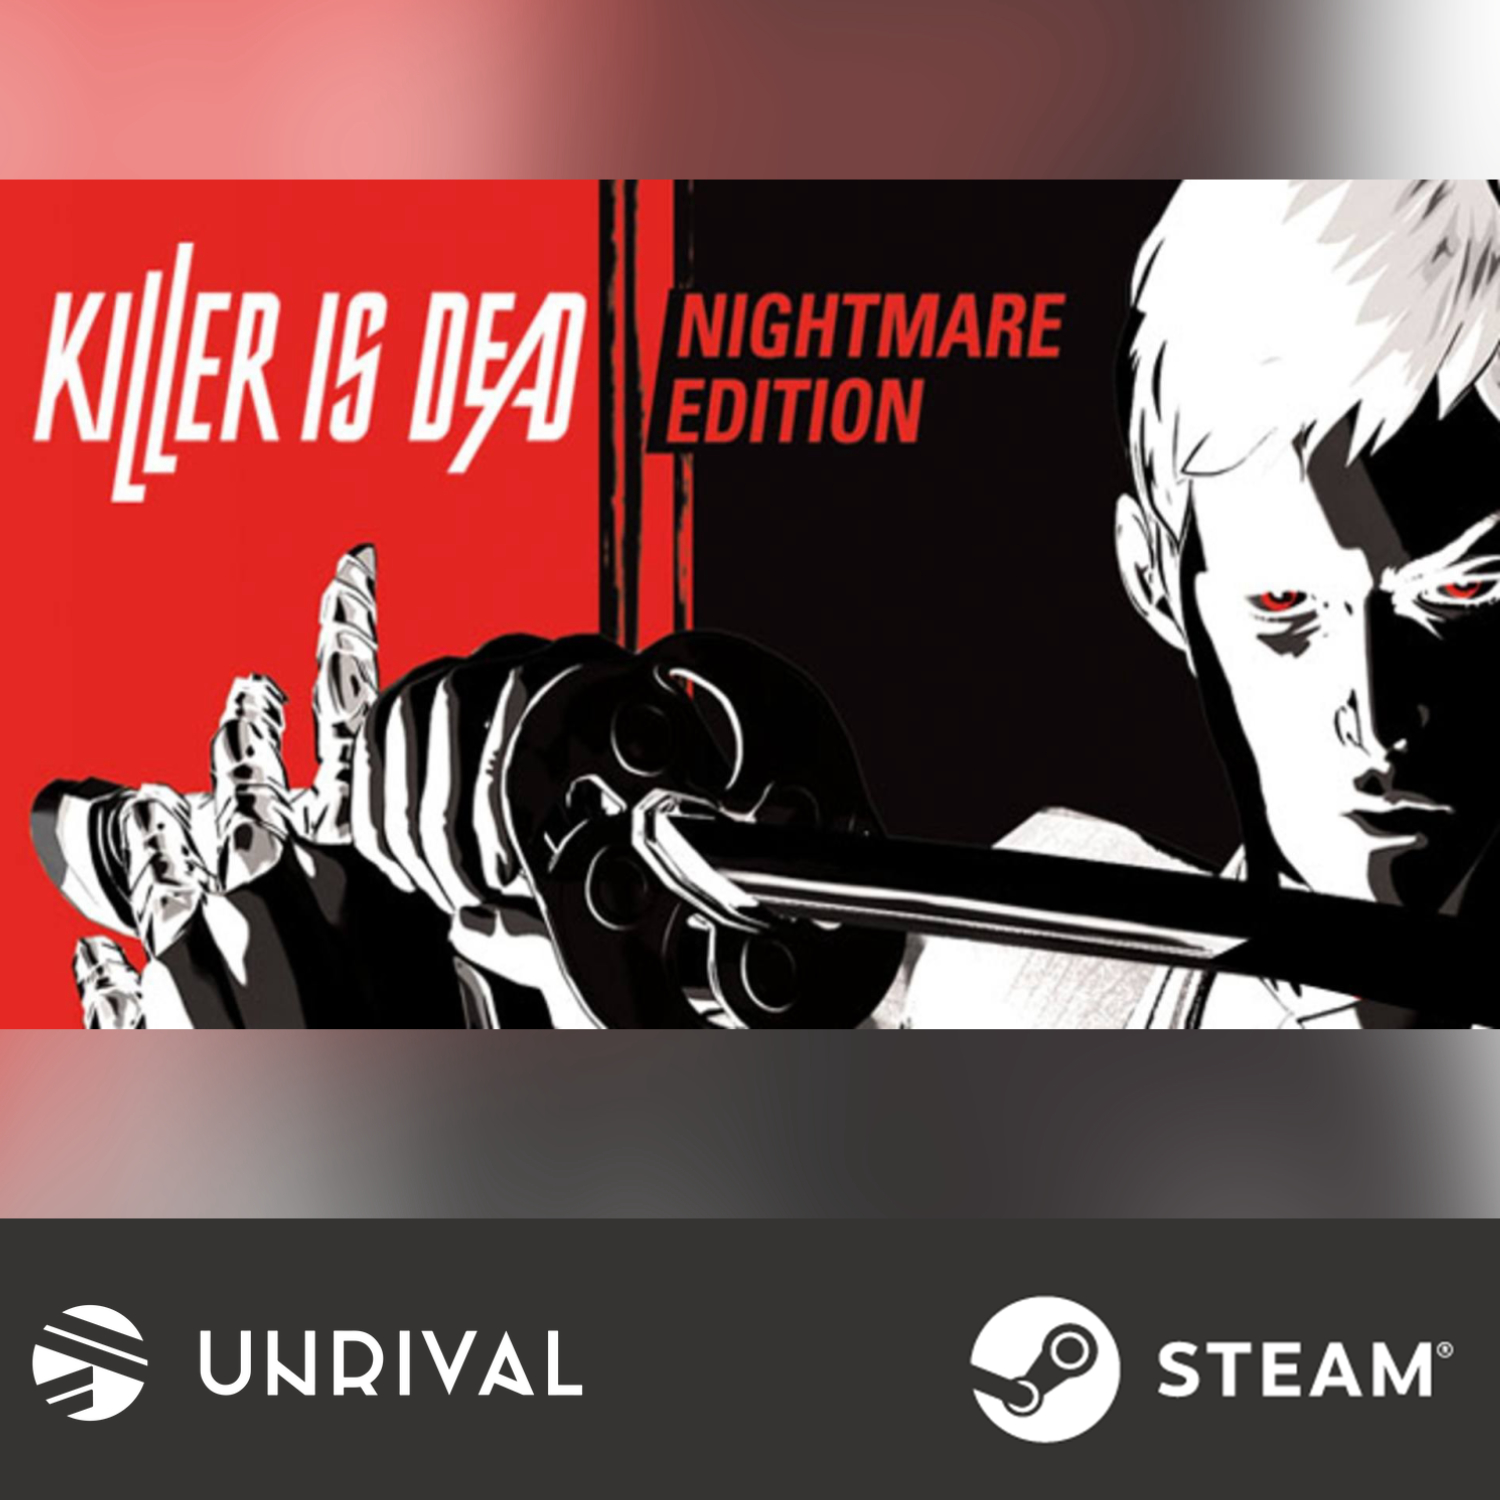 Killer is Dead: Nightmare Edition PC Digital Download Game (Single Player) - Unrival